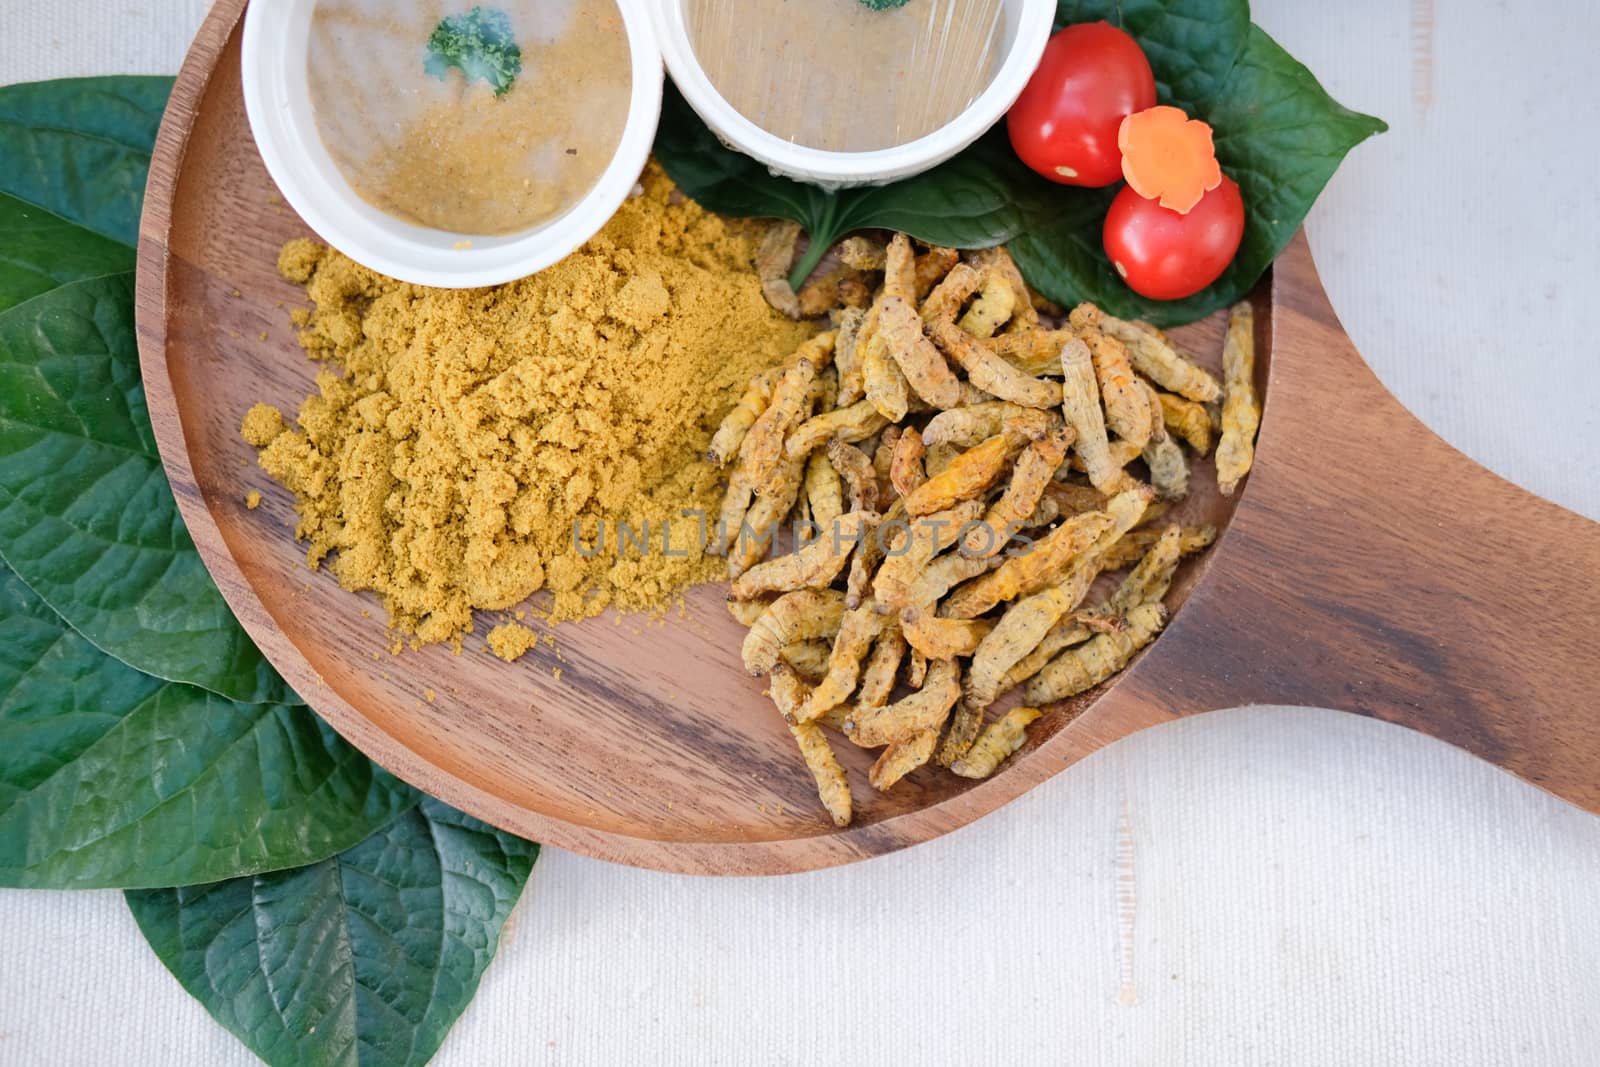 dried worm powder with vegetable. food ingredient for mixing with Thai curry paste